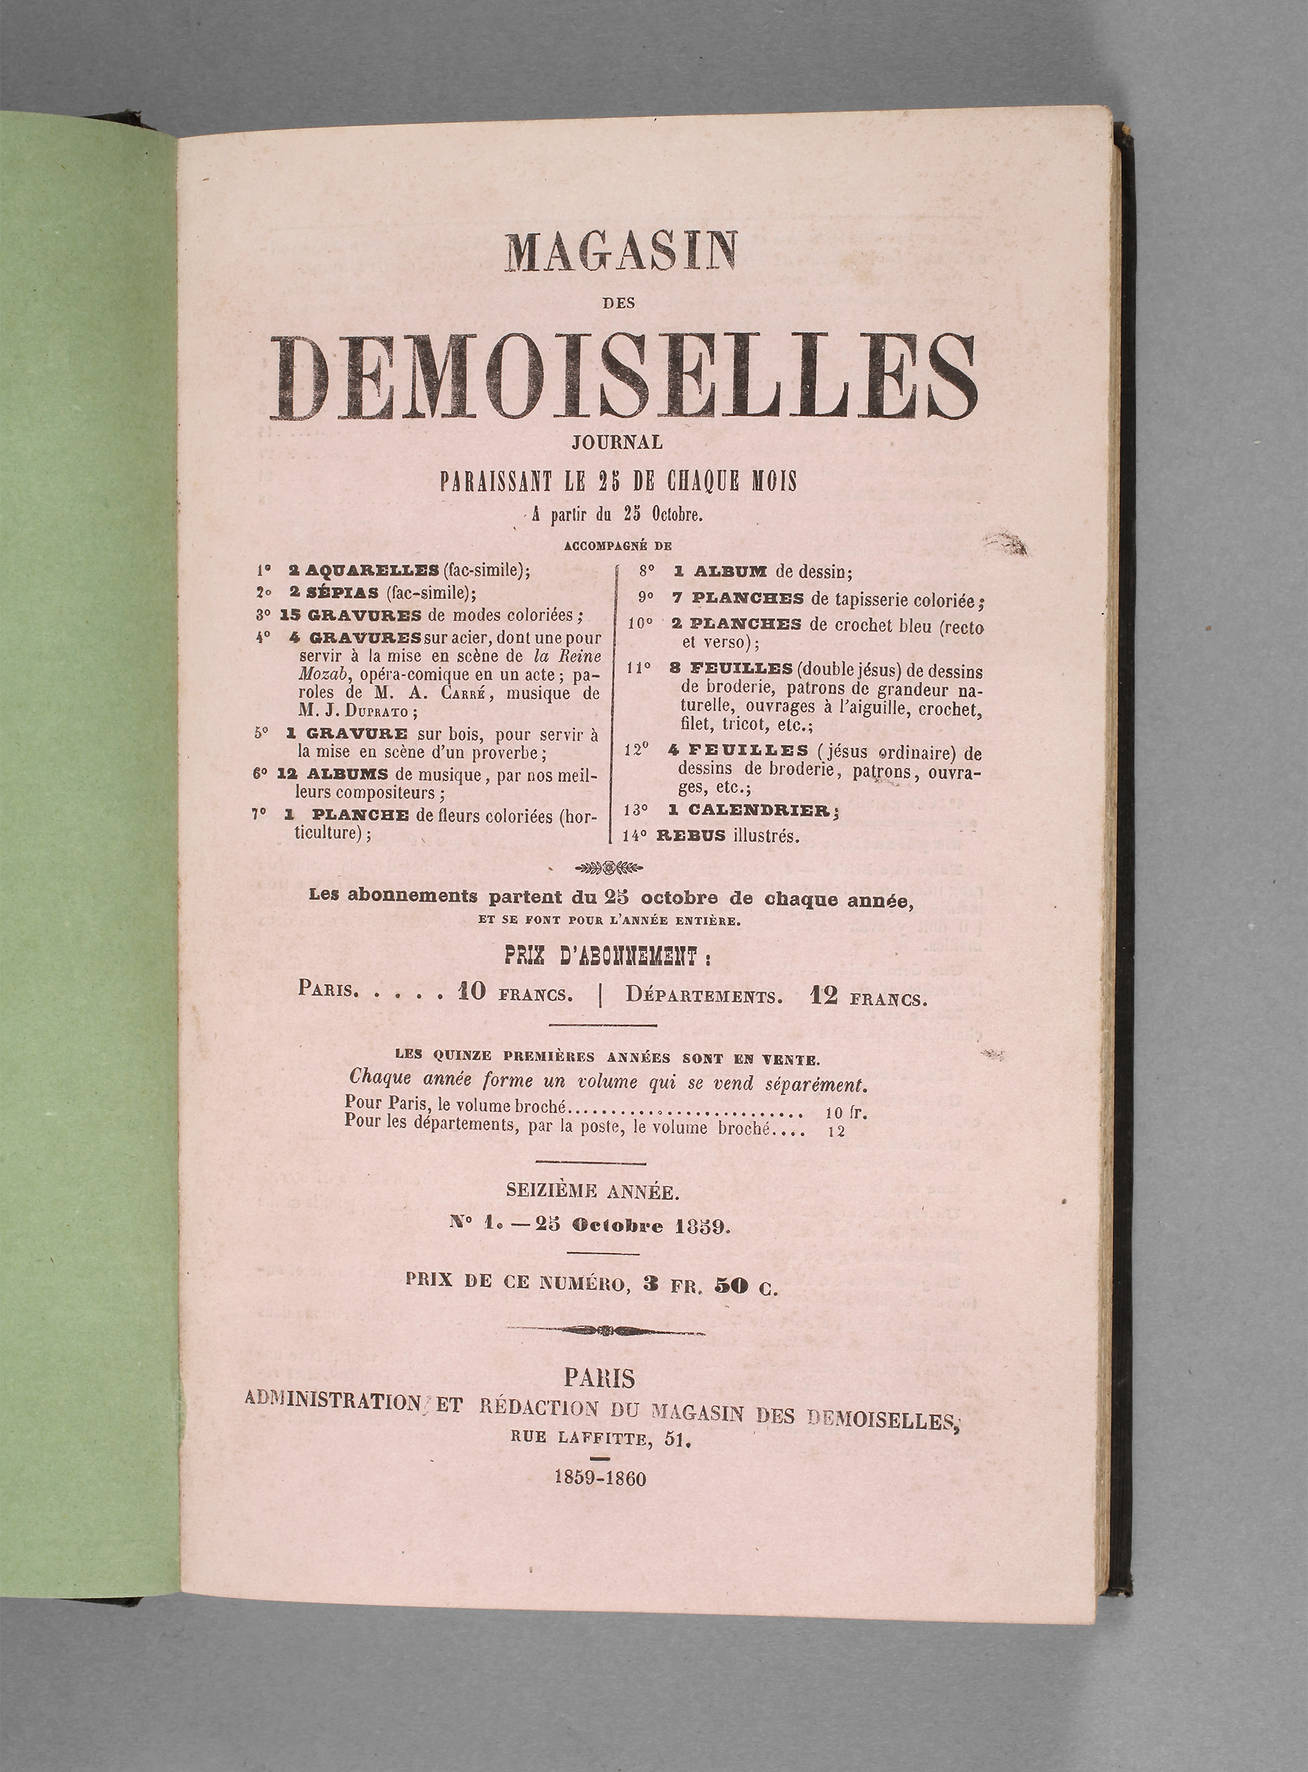 Modejournal 1859/60